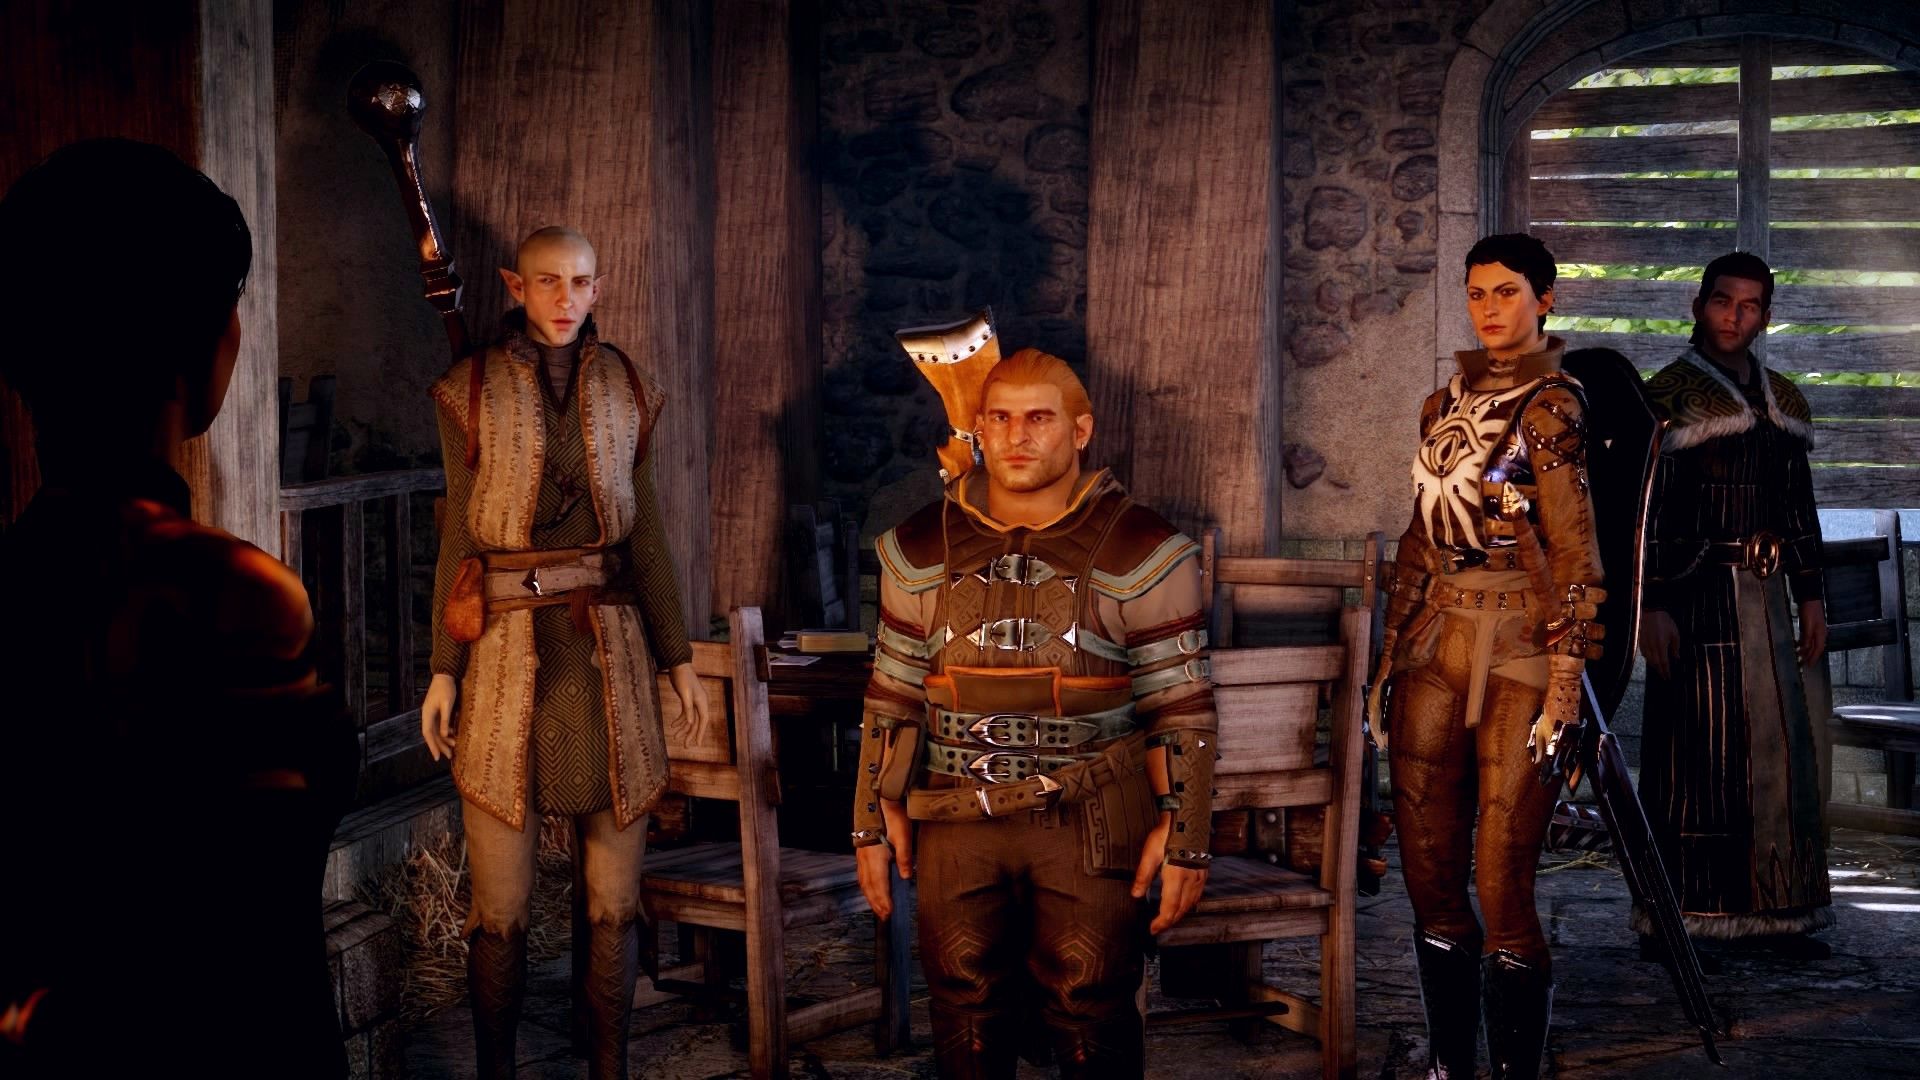 Players can choose which companions join their party in Dragon Age: Inquisition, with each party containing a combination of mages, warriors, and rogues.